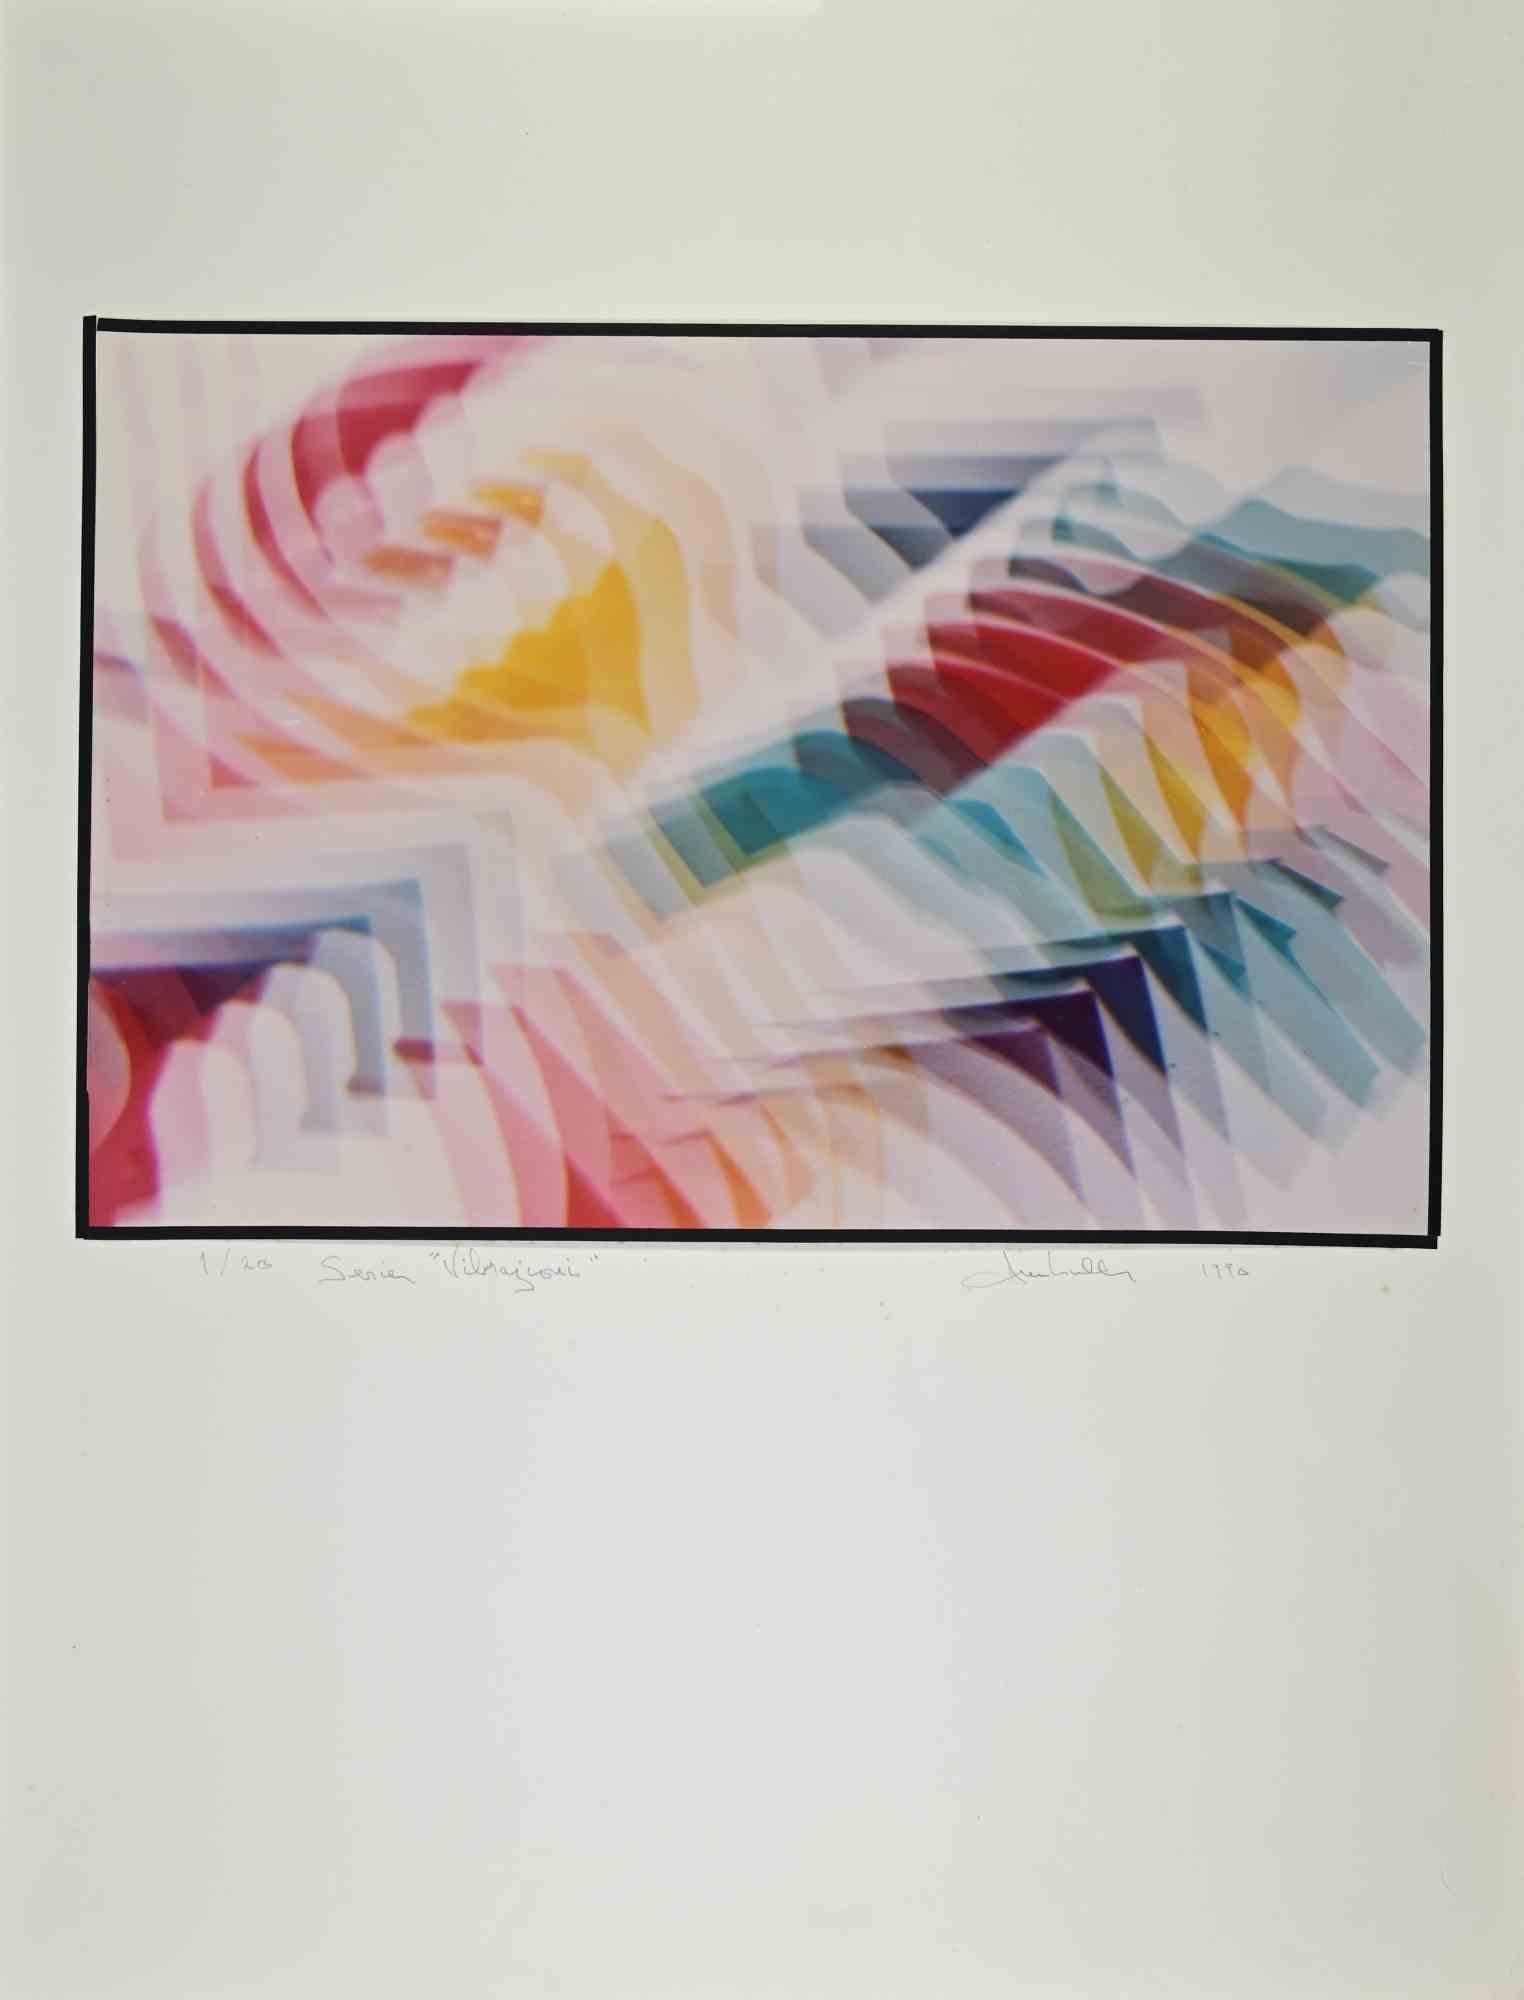 Exibition print from “ Vibrazioni”  is a vintage photographic print on color paper applied on cardboard realized by Harold Miller Null in 1990

Hand signed and dated on the lower right margin

Print performed for personal exposition in Ferrara